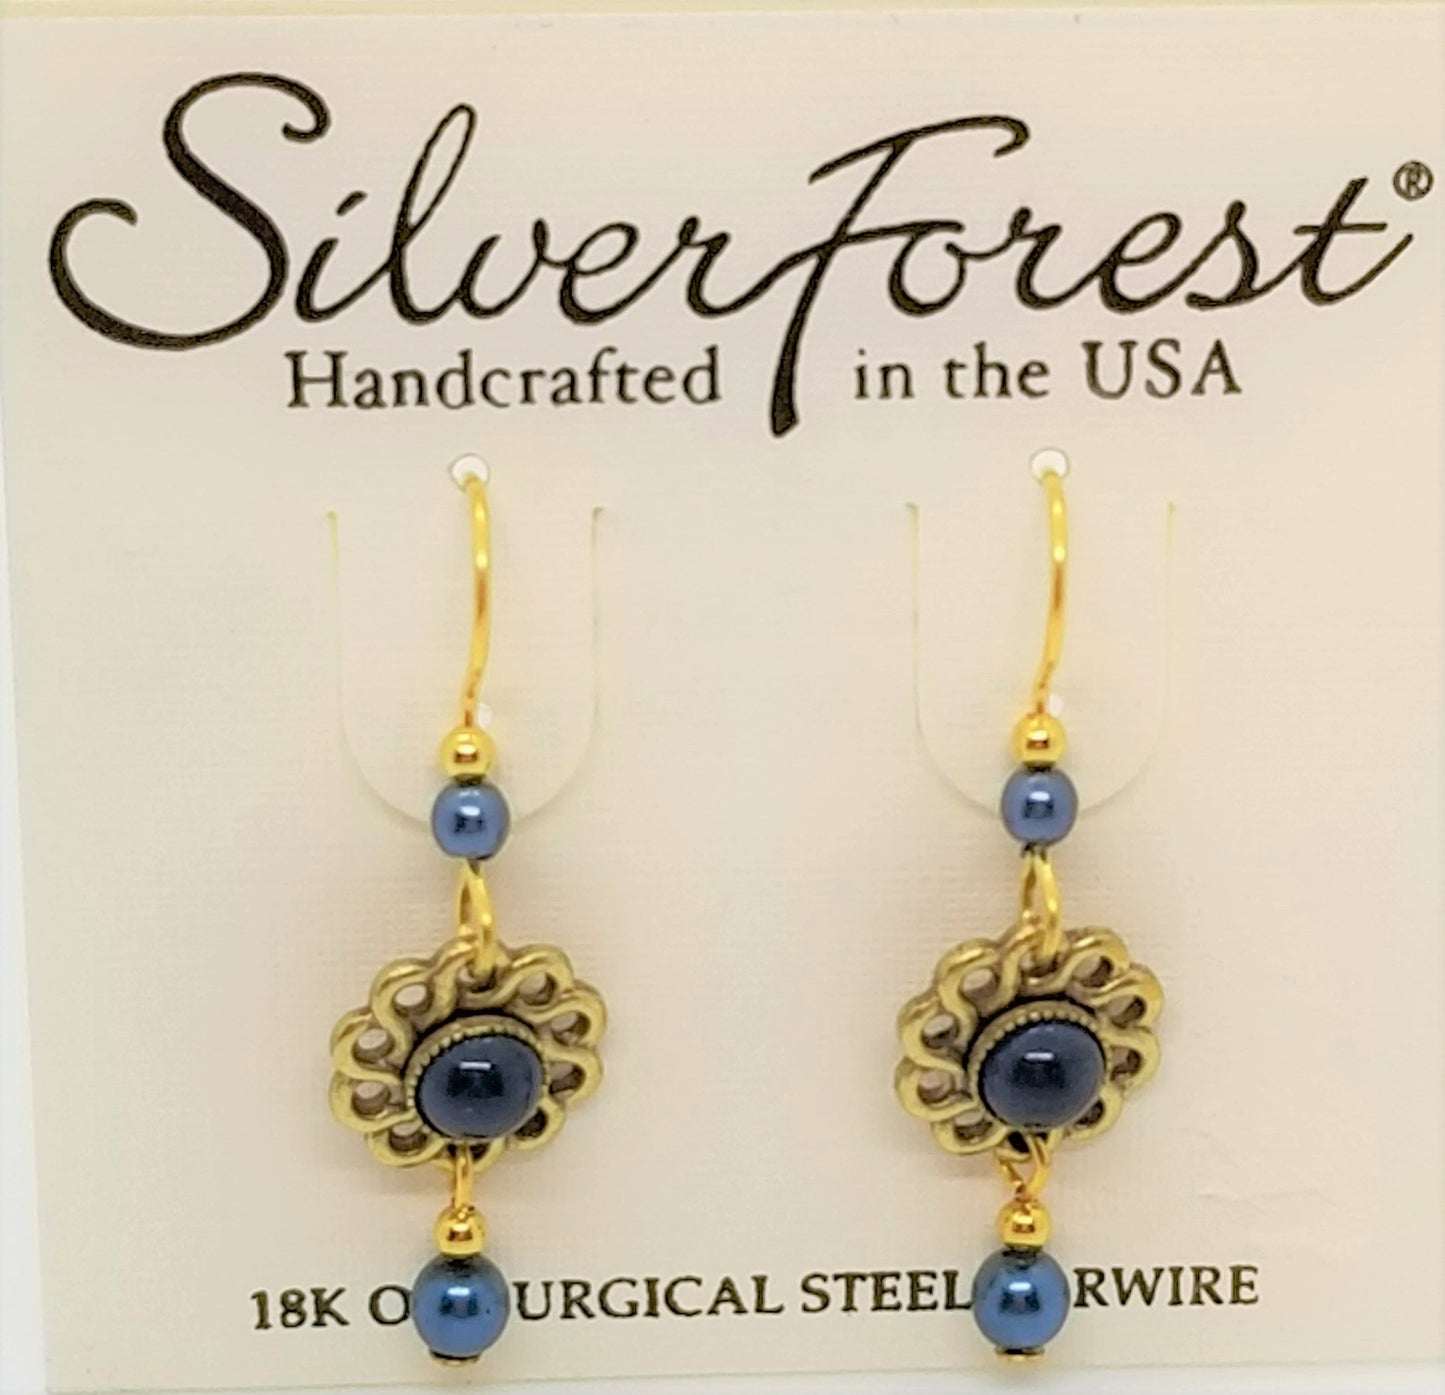 Silver forest 18kt gold plated surgical steel ear wires and blue earrings